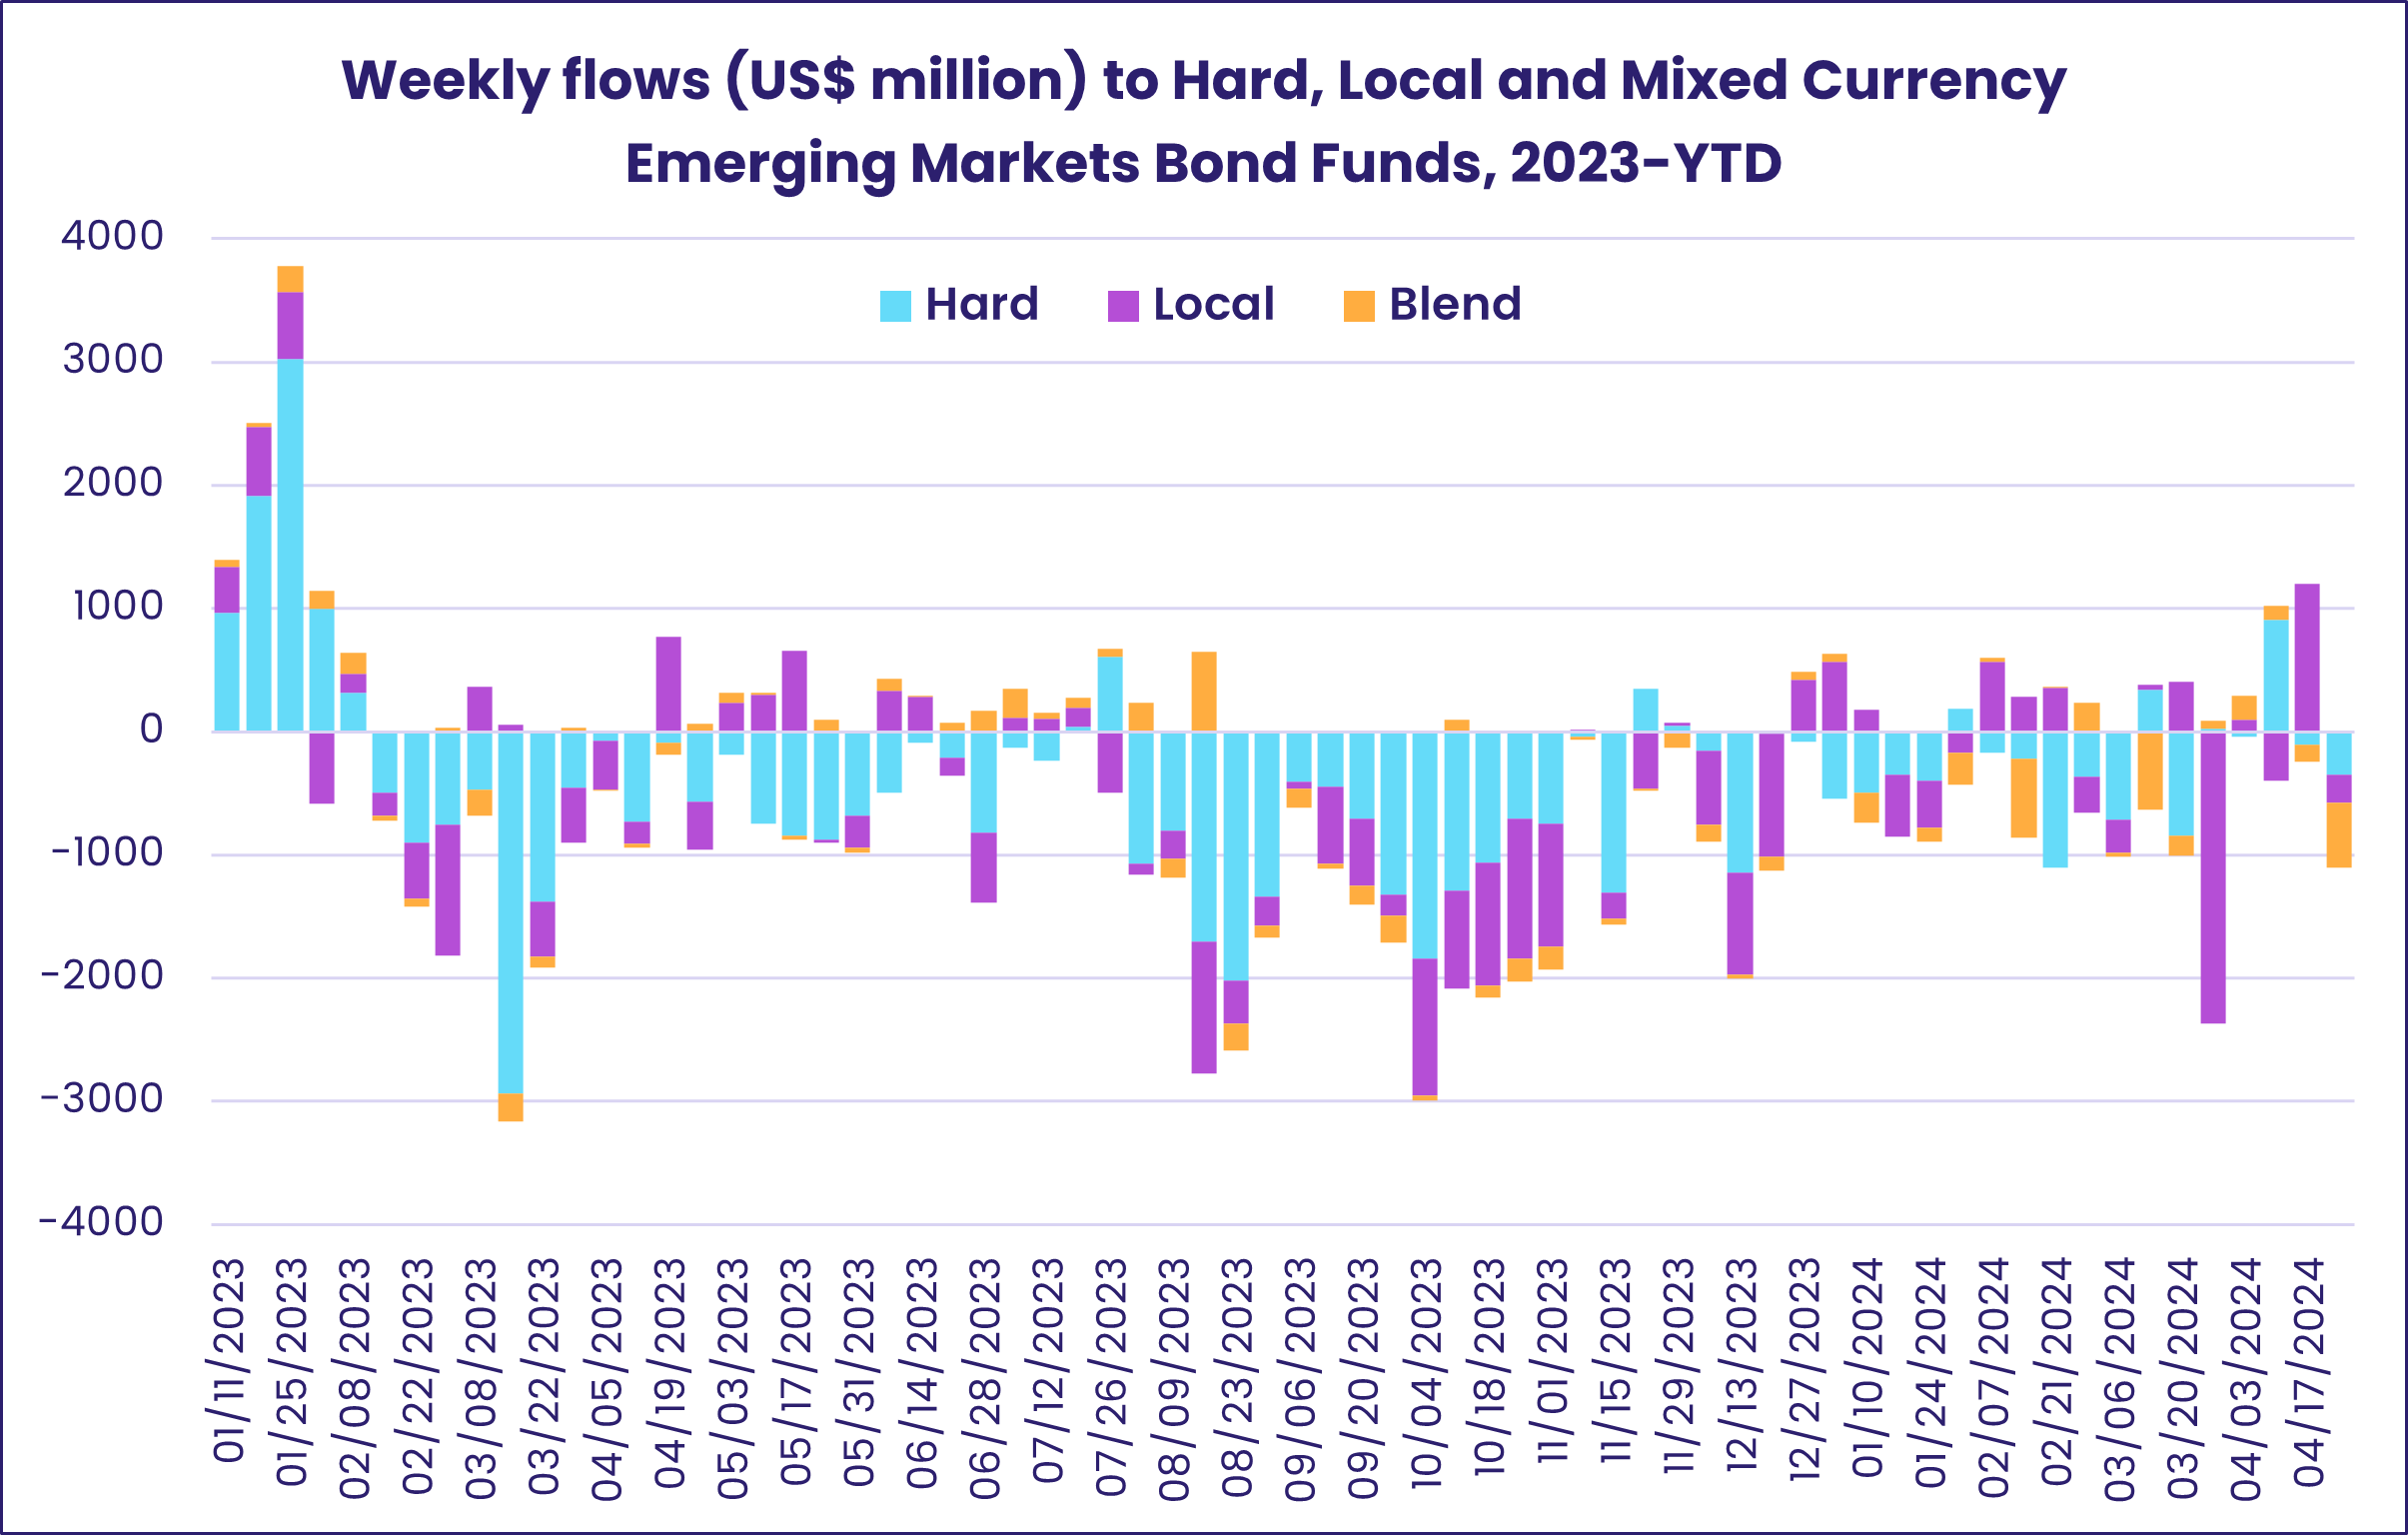 Chart representing 'Weekly flows (US$ million) to Hard, Local and Mixed Currency Emerging Markets Bond Funds, 2023-YTD'